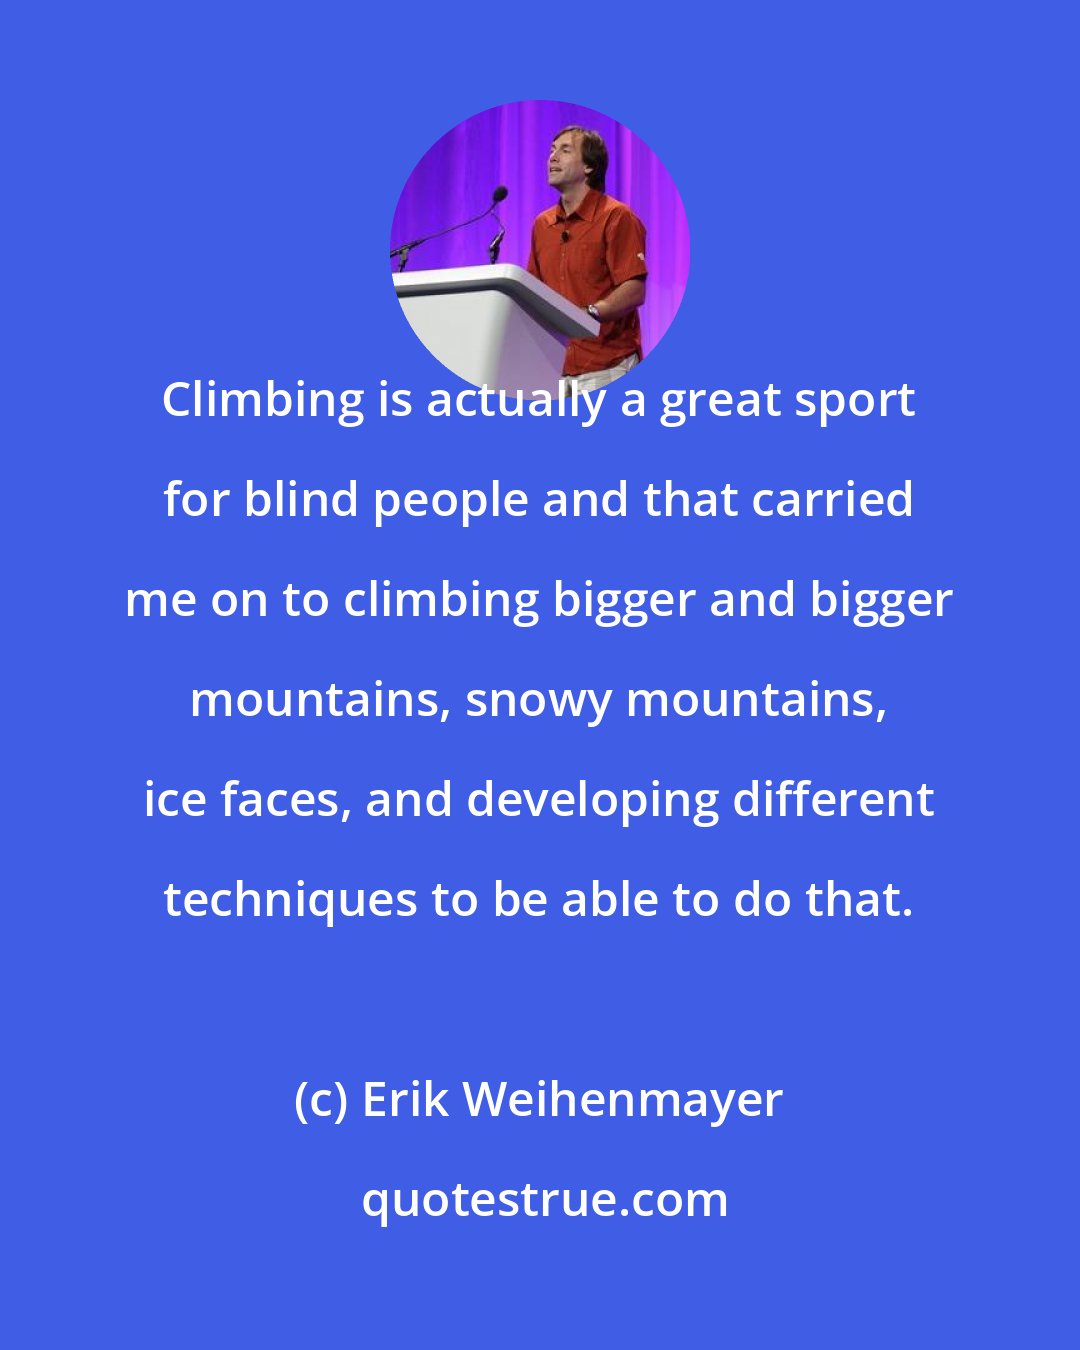 Erik Weihenmayer: Climbing is actually a great sport for blind people and that carried me on to climbing bigger and bigger mountains, snowy mountains, ice faces, and developing different techniques to be able to do that.